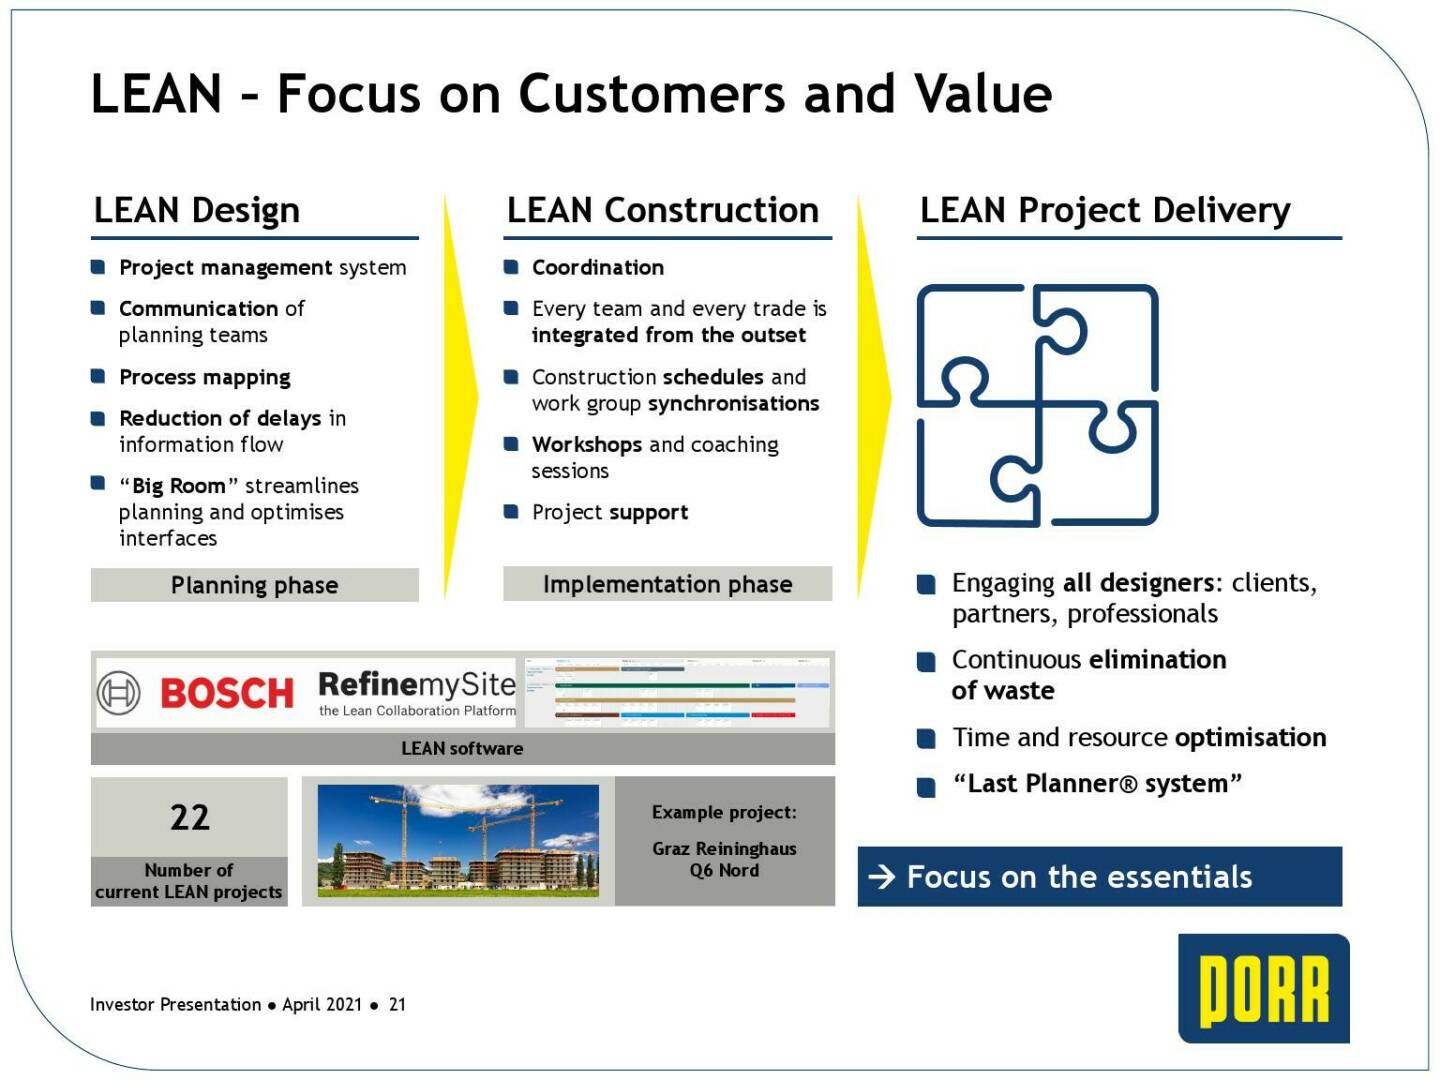 Porr - LEAN - Focus on customers and value